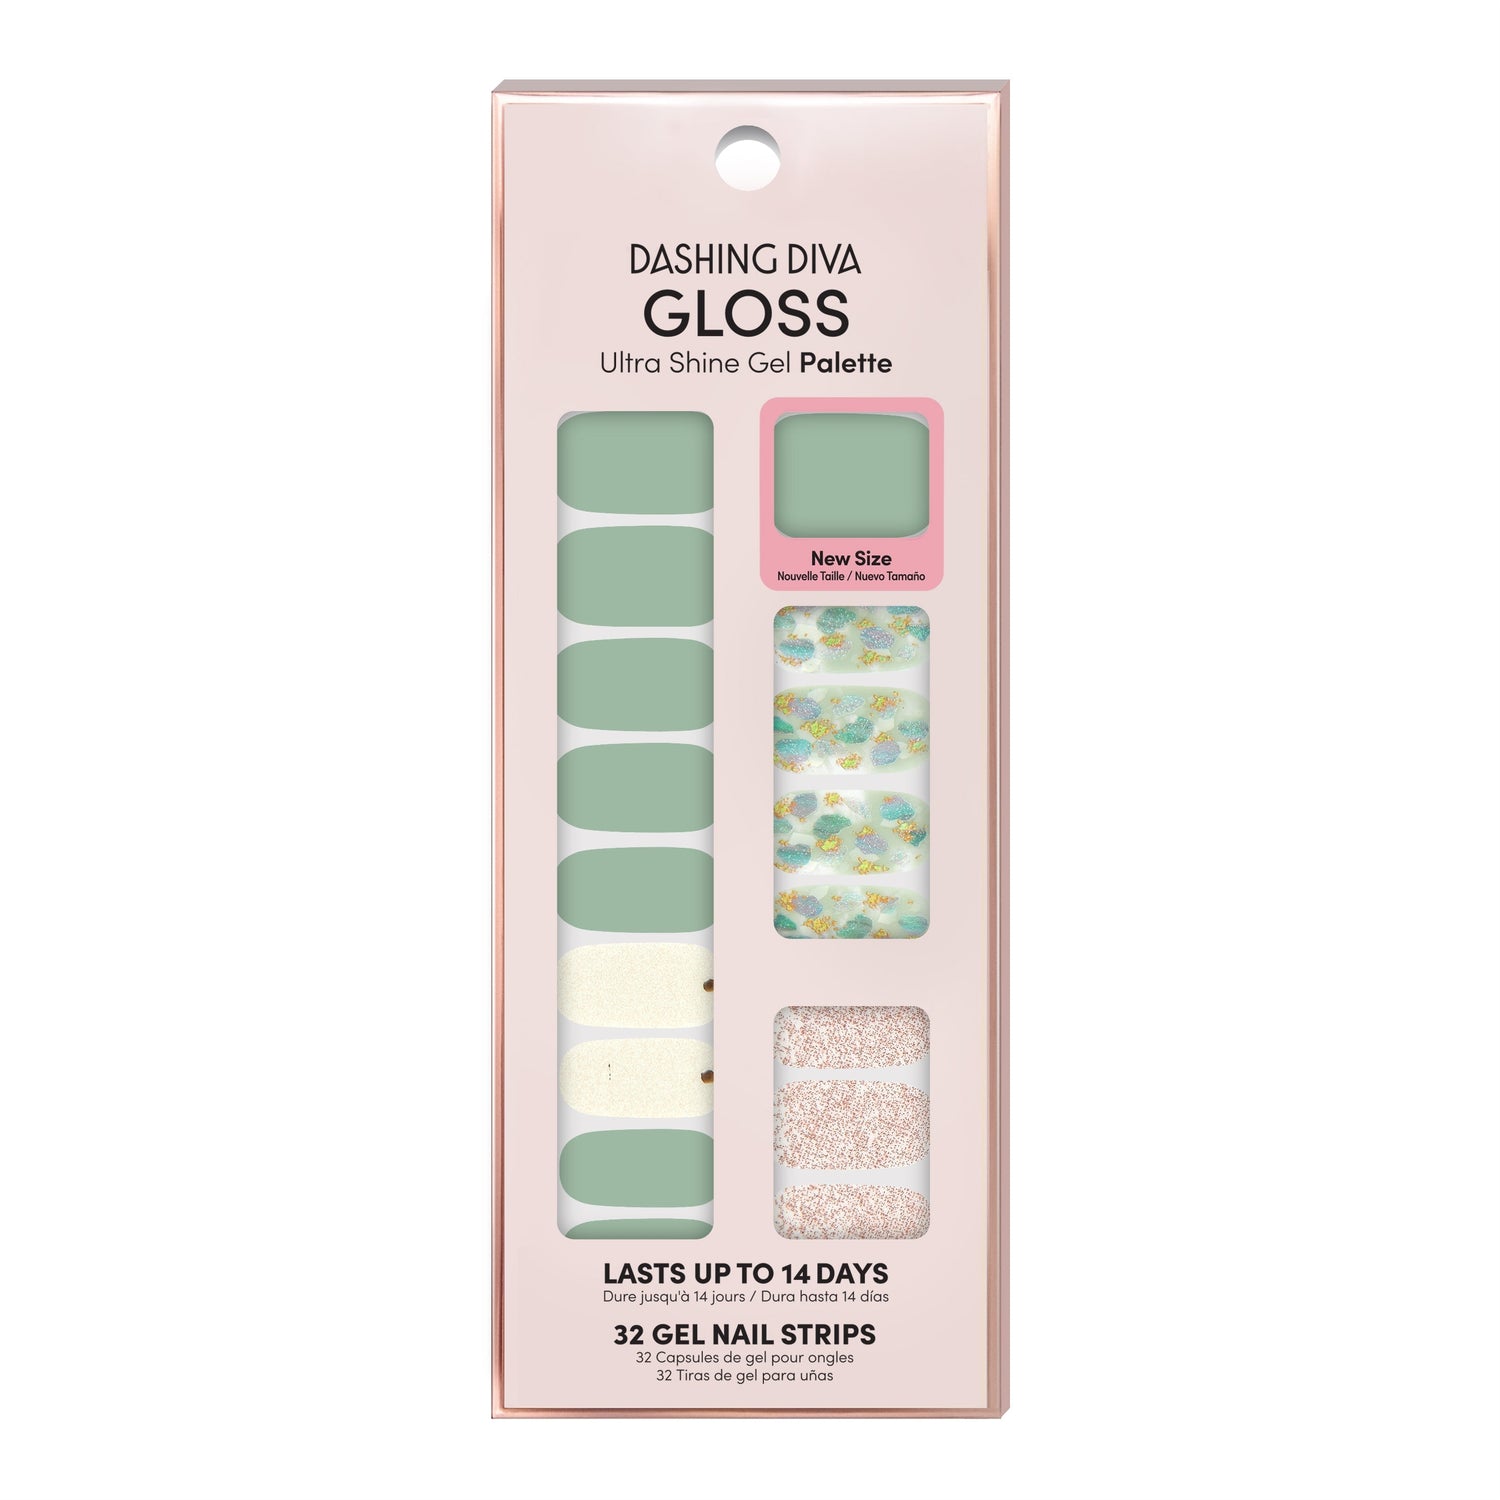 Dashing Diva GLOSS sage green gel nail strips with mosaic, glitter, and metallic accents.